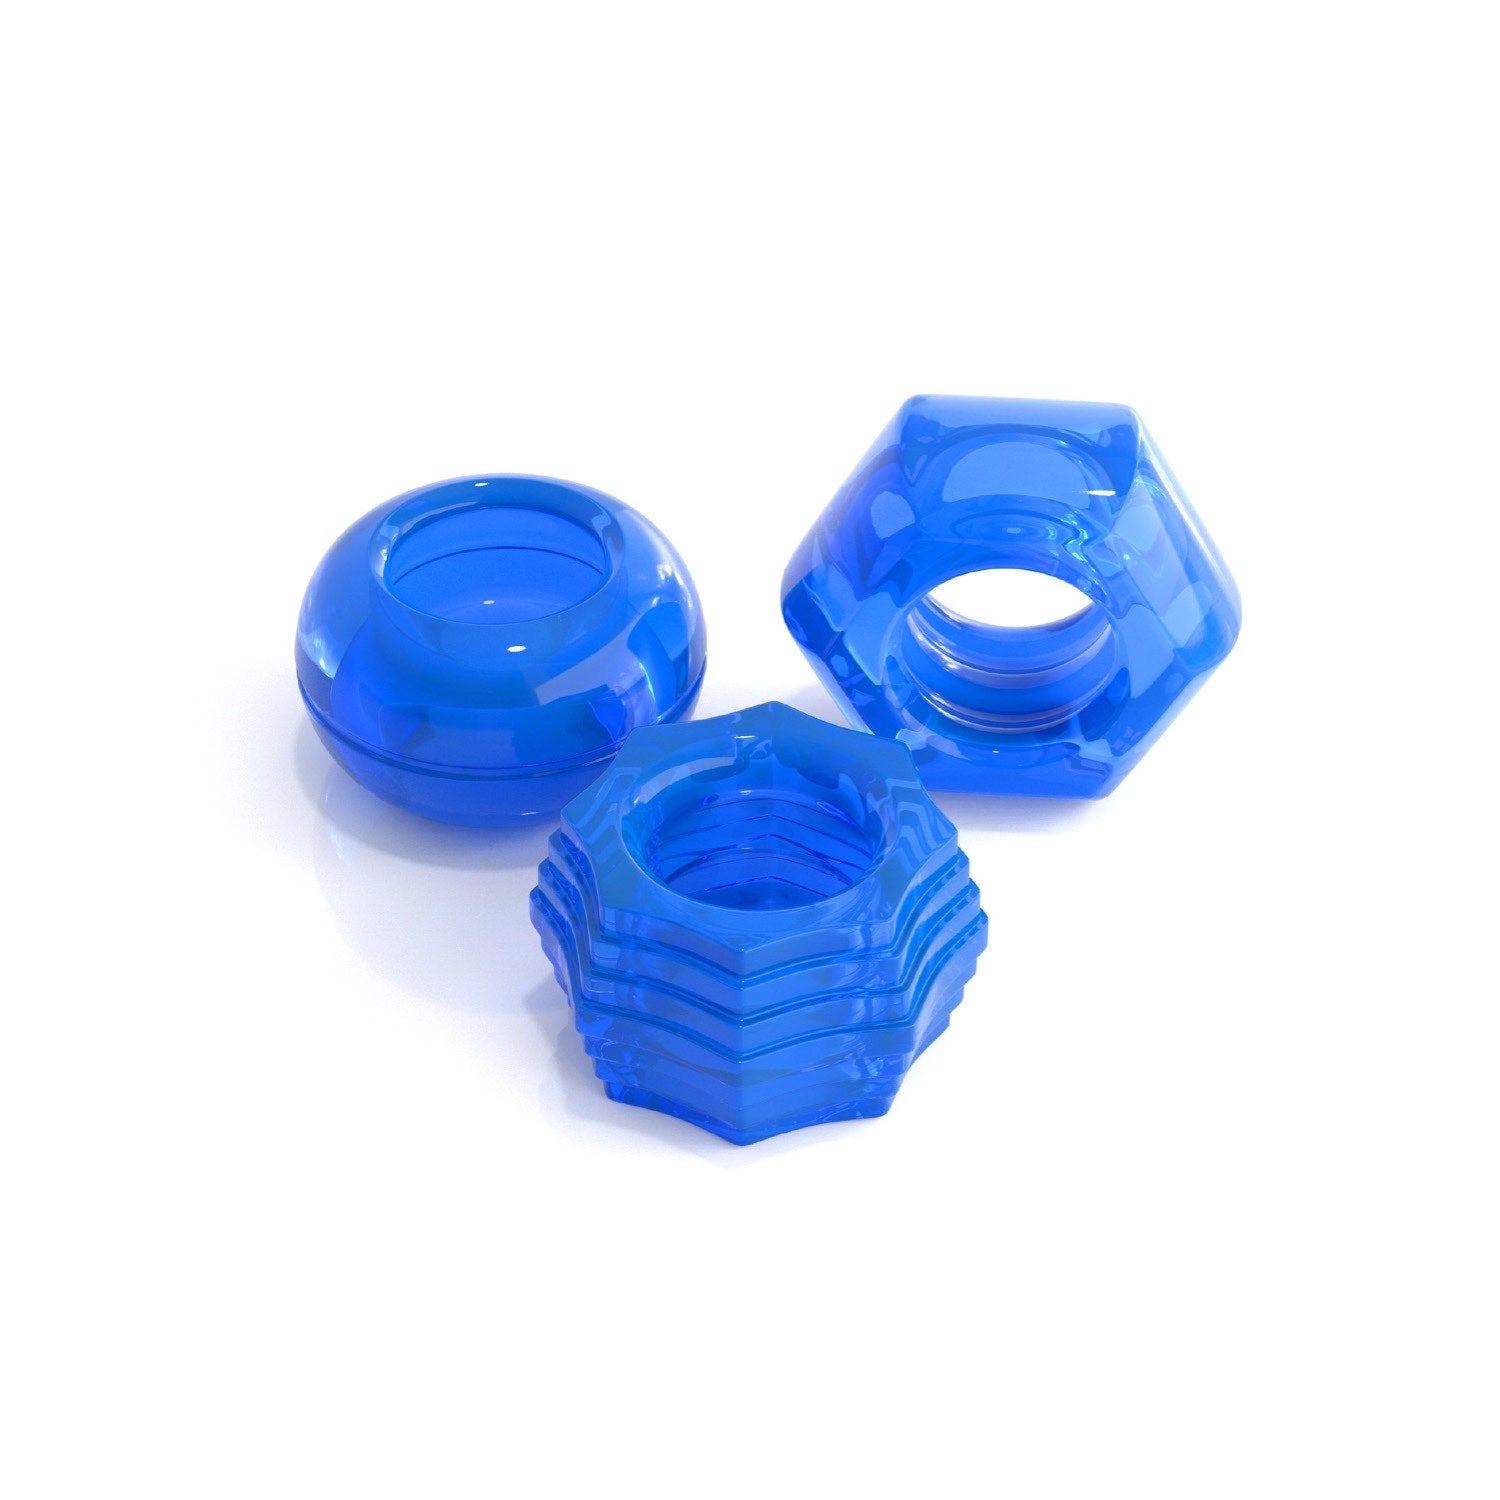 Classix Deluxe Cock Ring Set - Blue Cock Rings - Set of 2 by Pipedream